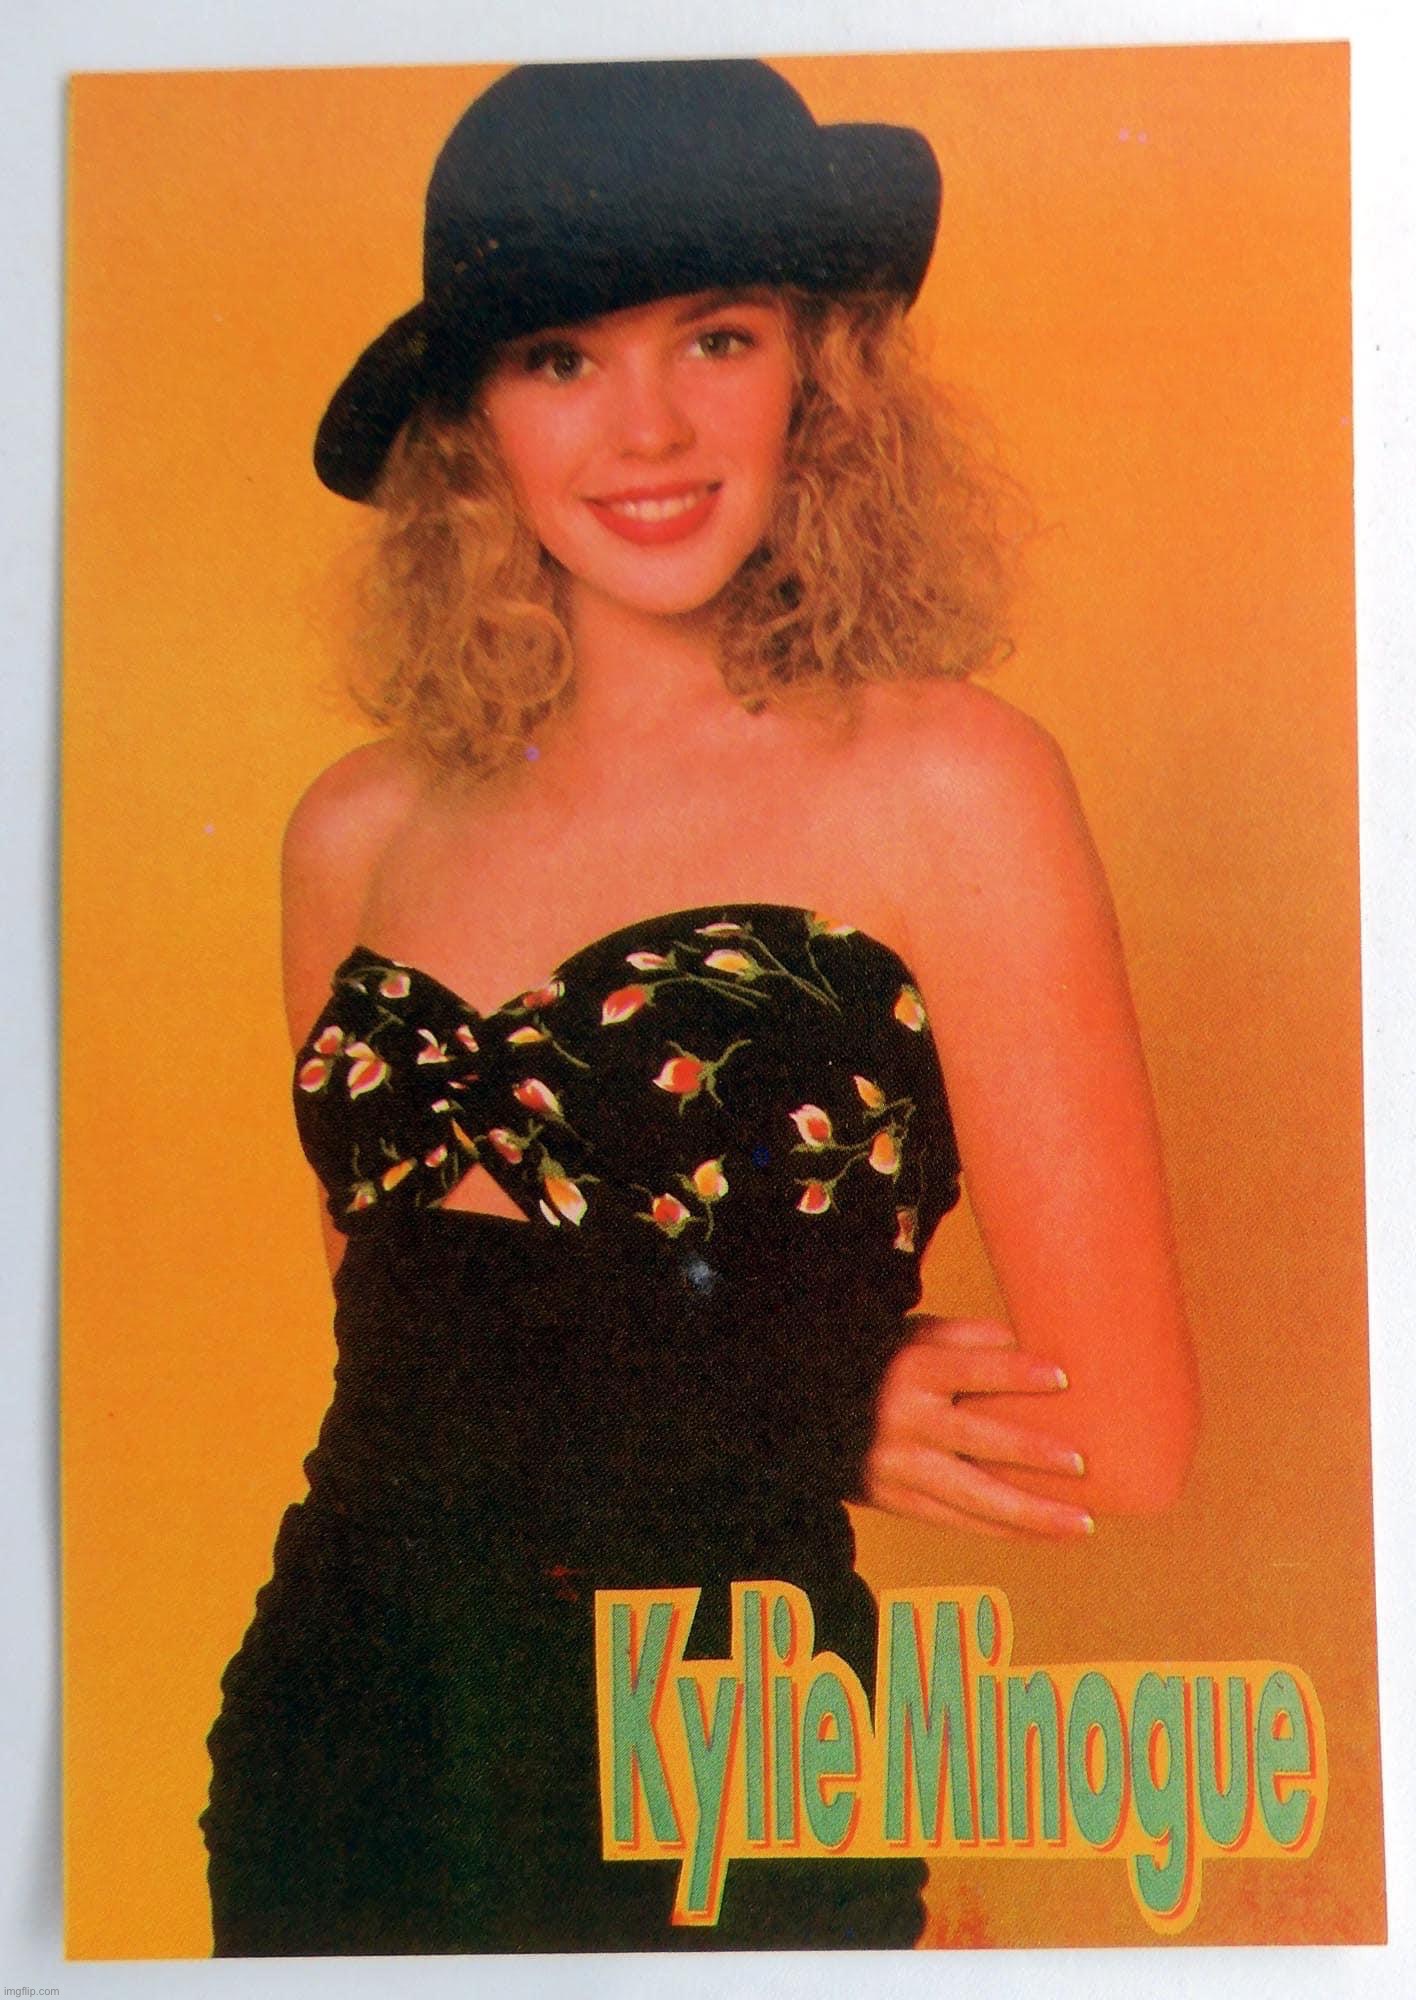 Kylie 80s poster | image tagged in kylie 80s poster | made w/ Imgflip meme maker